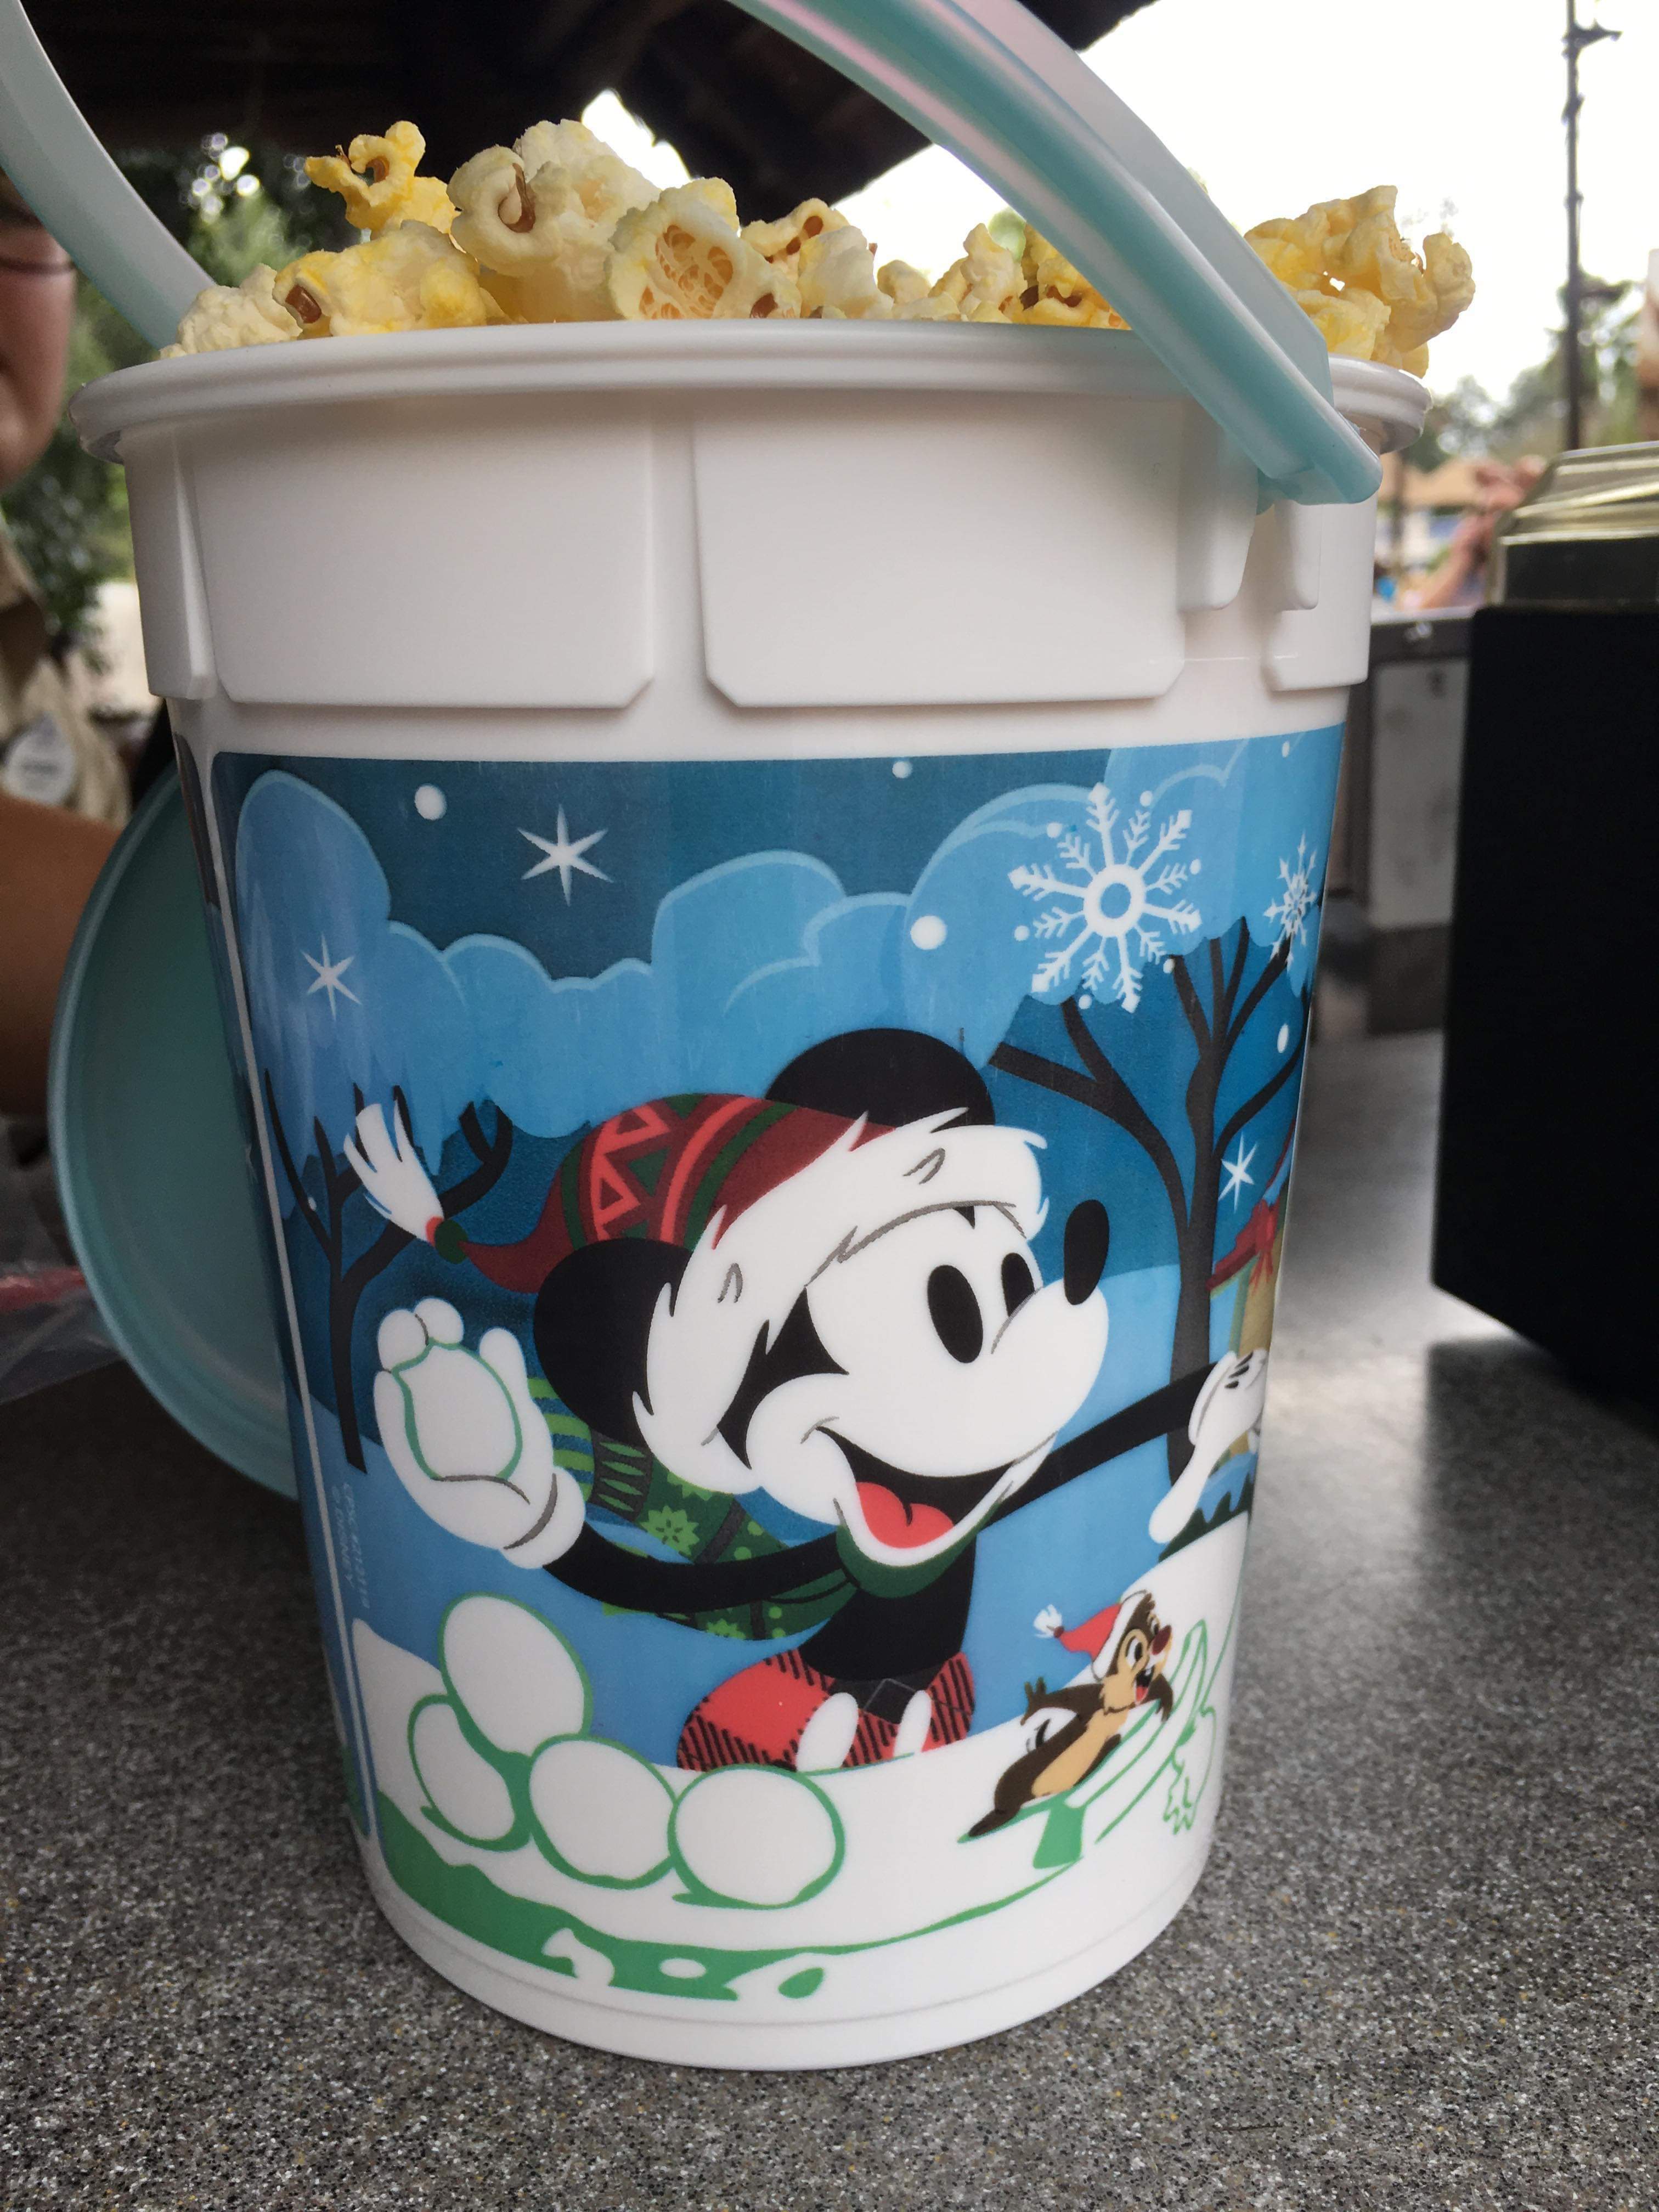 New Christmas Popcorn Buckets and More Have Popped up at Walt Disney World